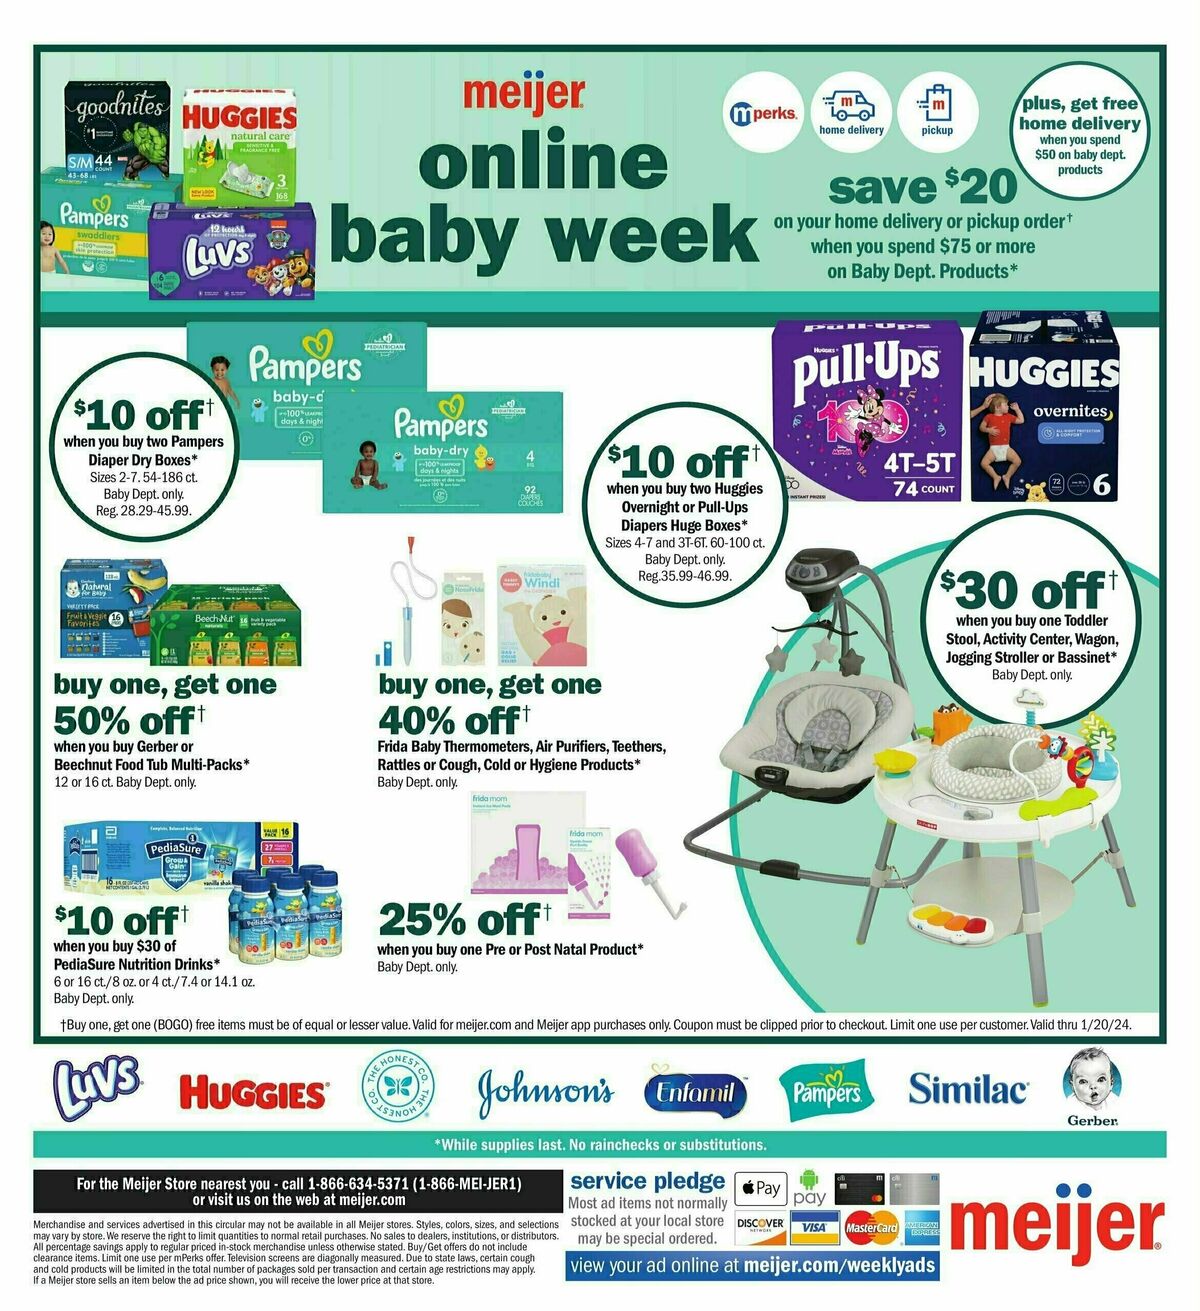 Meijer Baby Weekly Ad from January 14